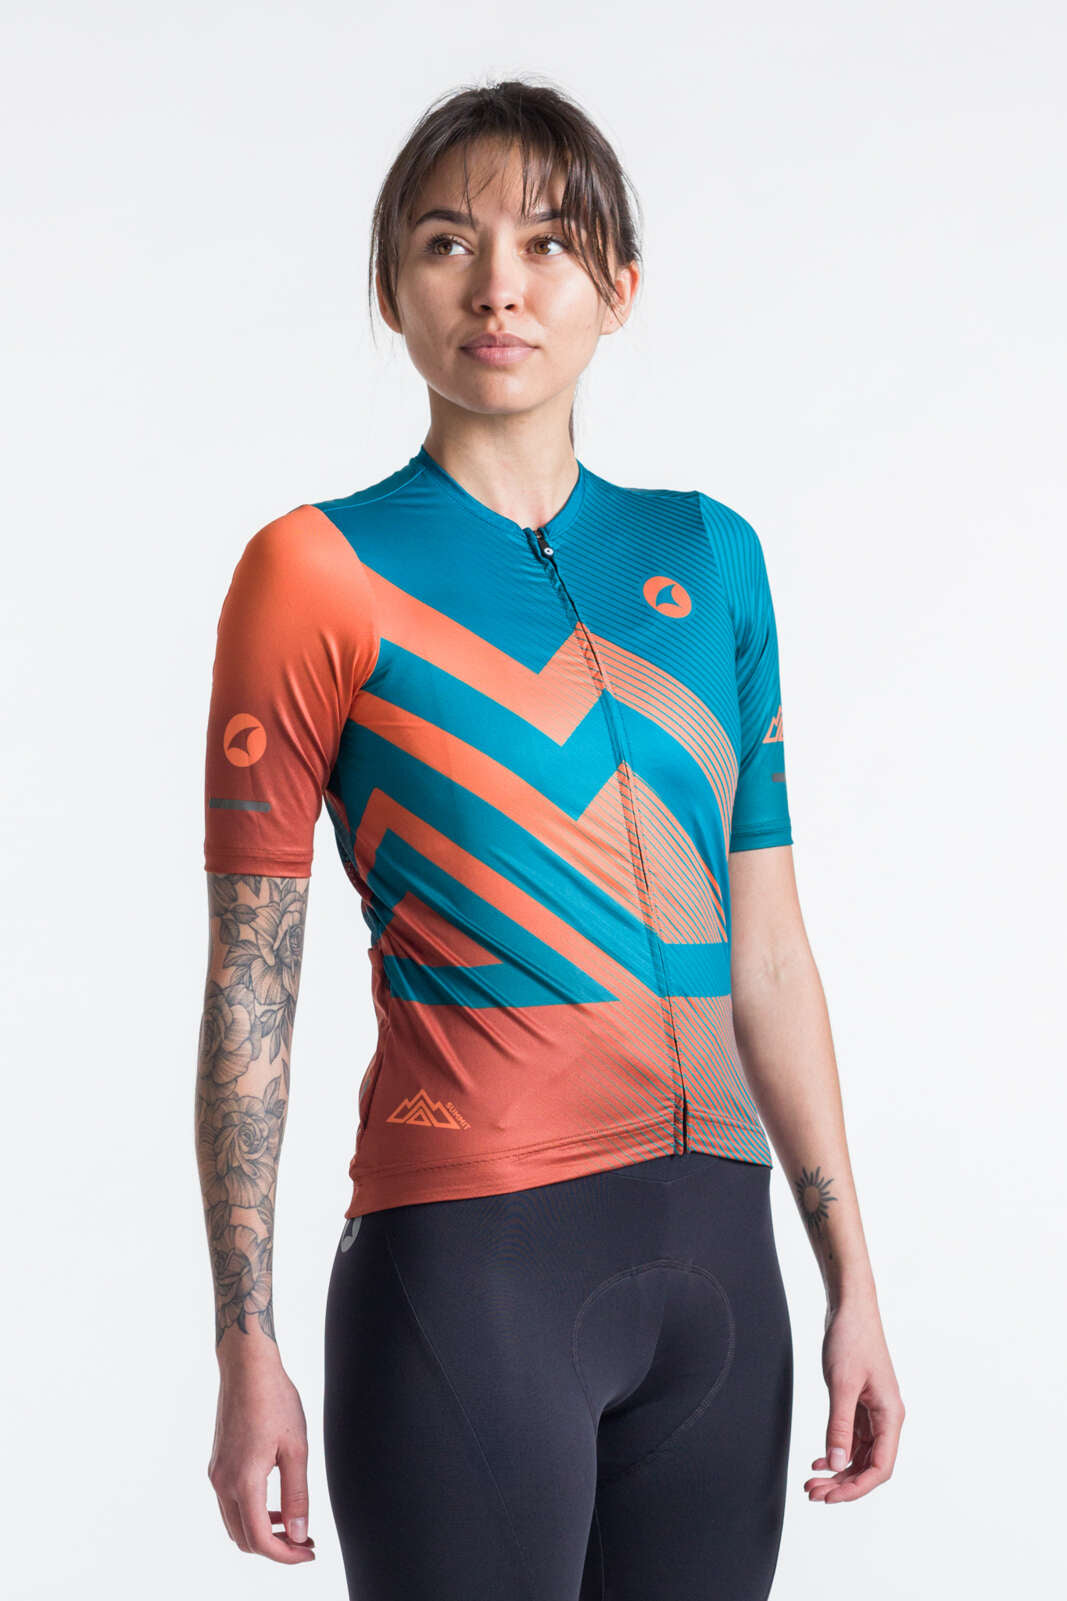 Women's Best Teal & Orange Cycling Jersey - Summit Front View